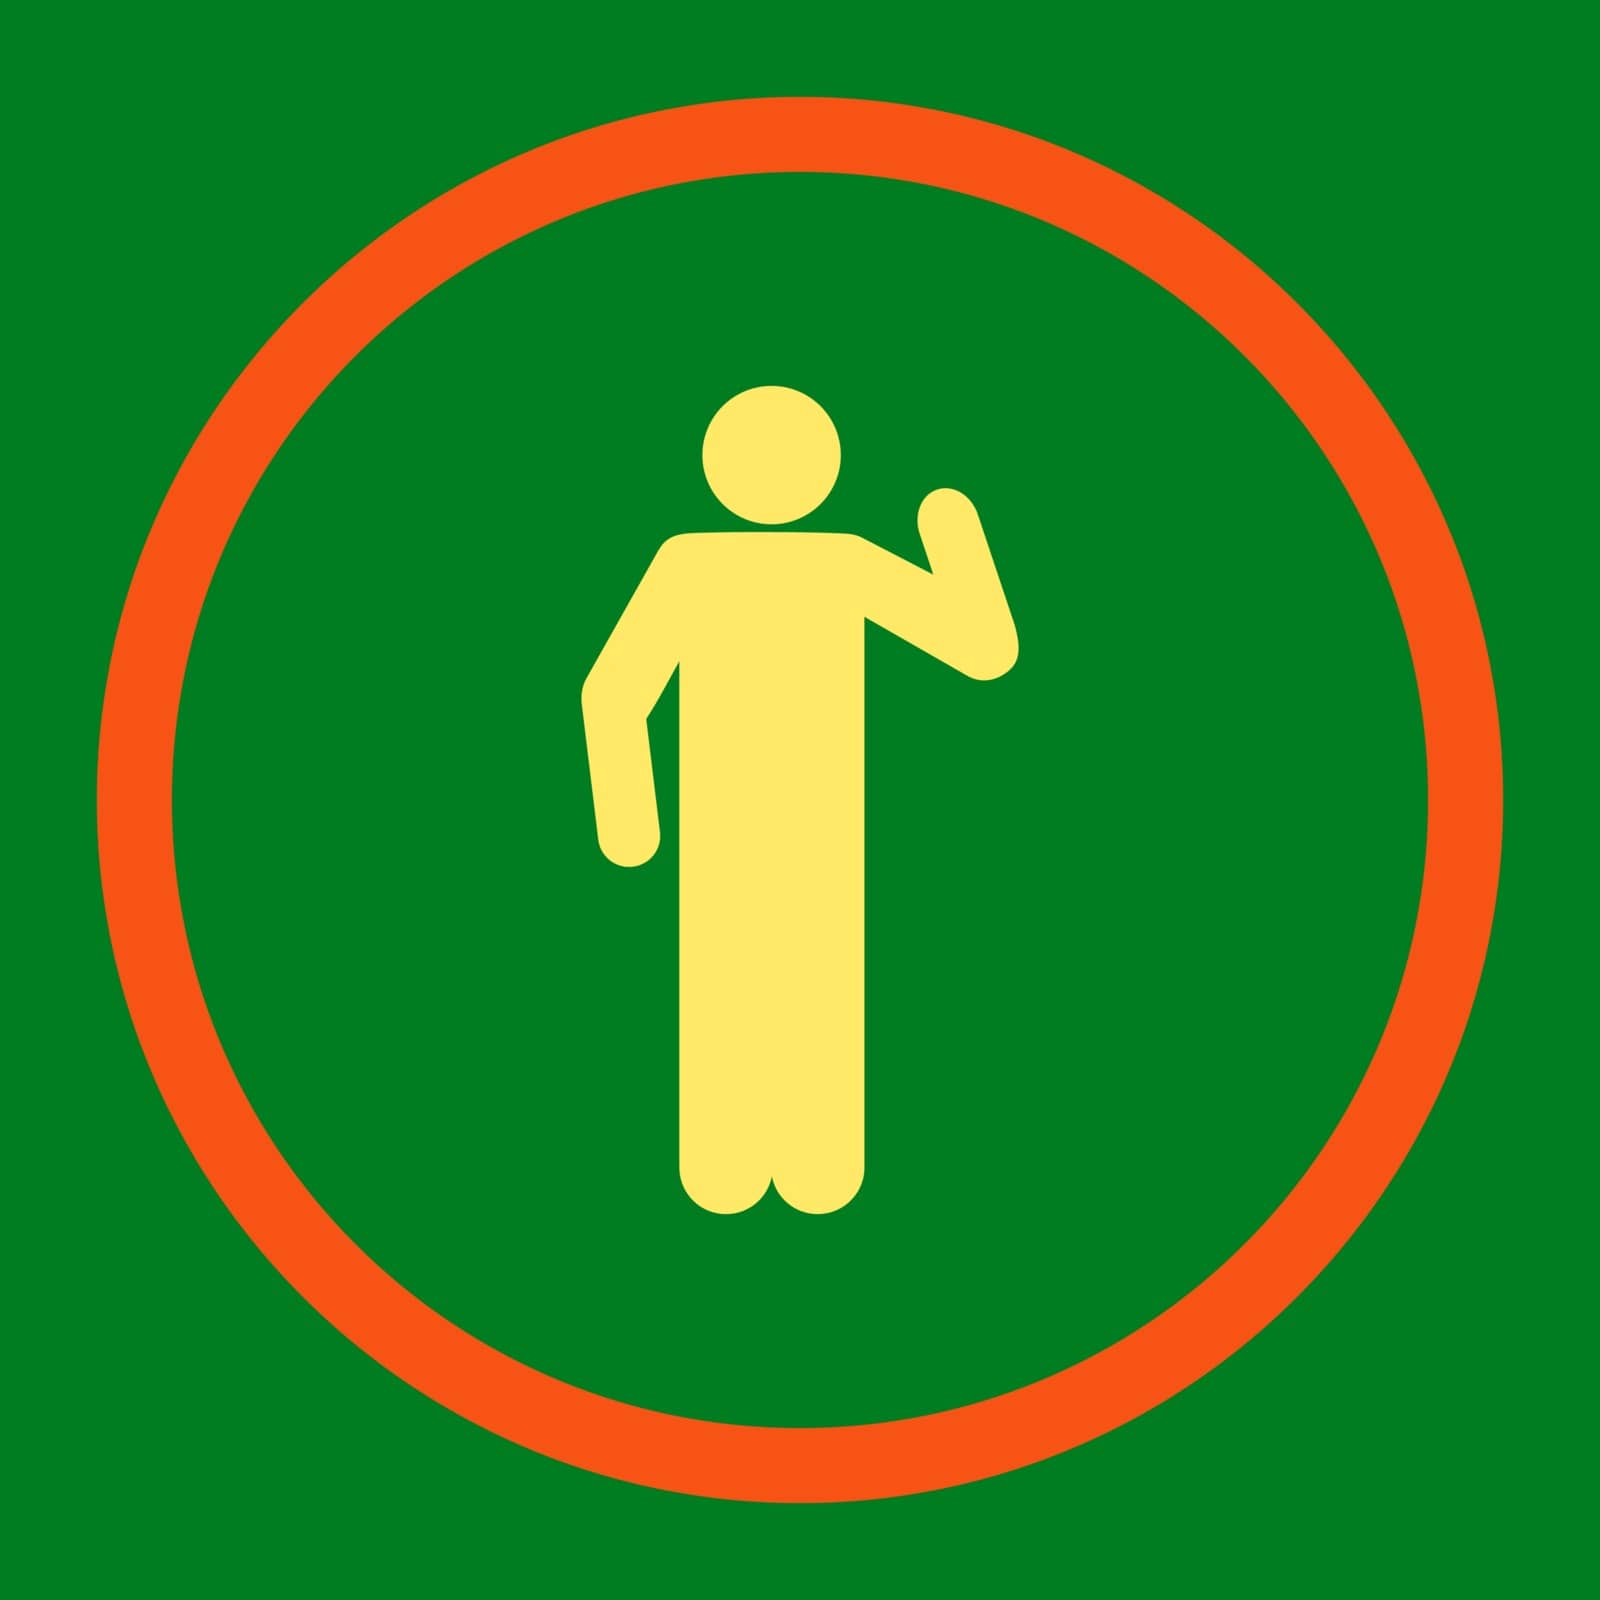 Opinion vector icon. This rounded flat symbol is drawn with orange and yellow colors on a green background.